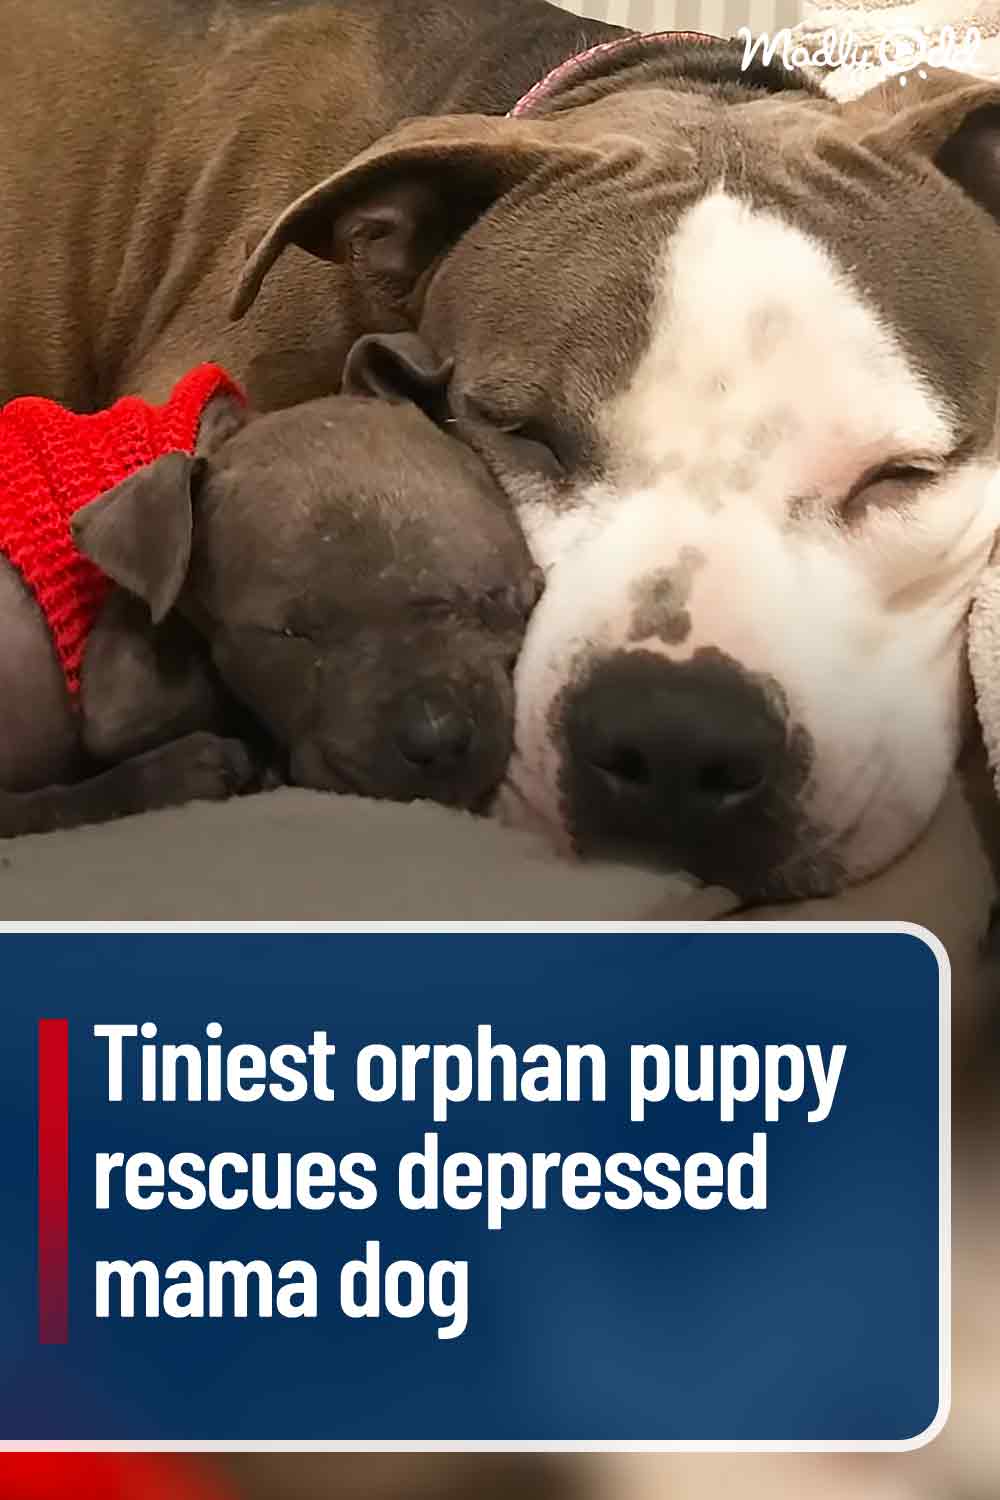 Tiniest orphan puppy rescues depressed mama dog